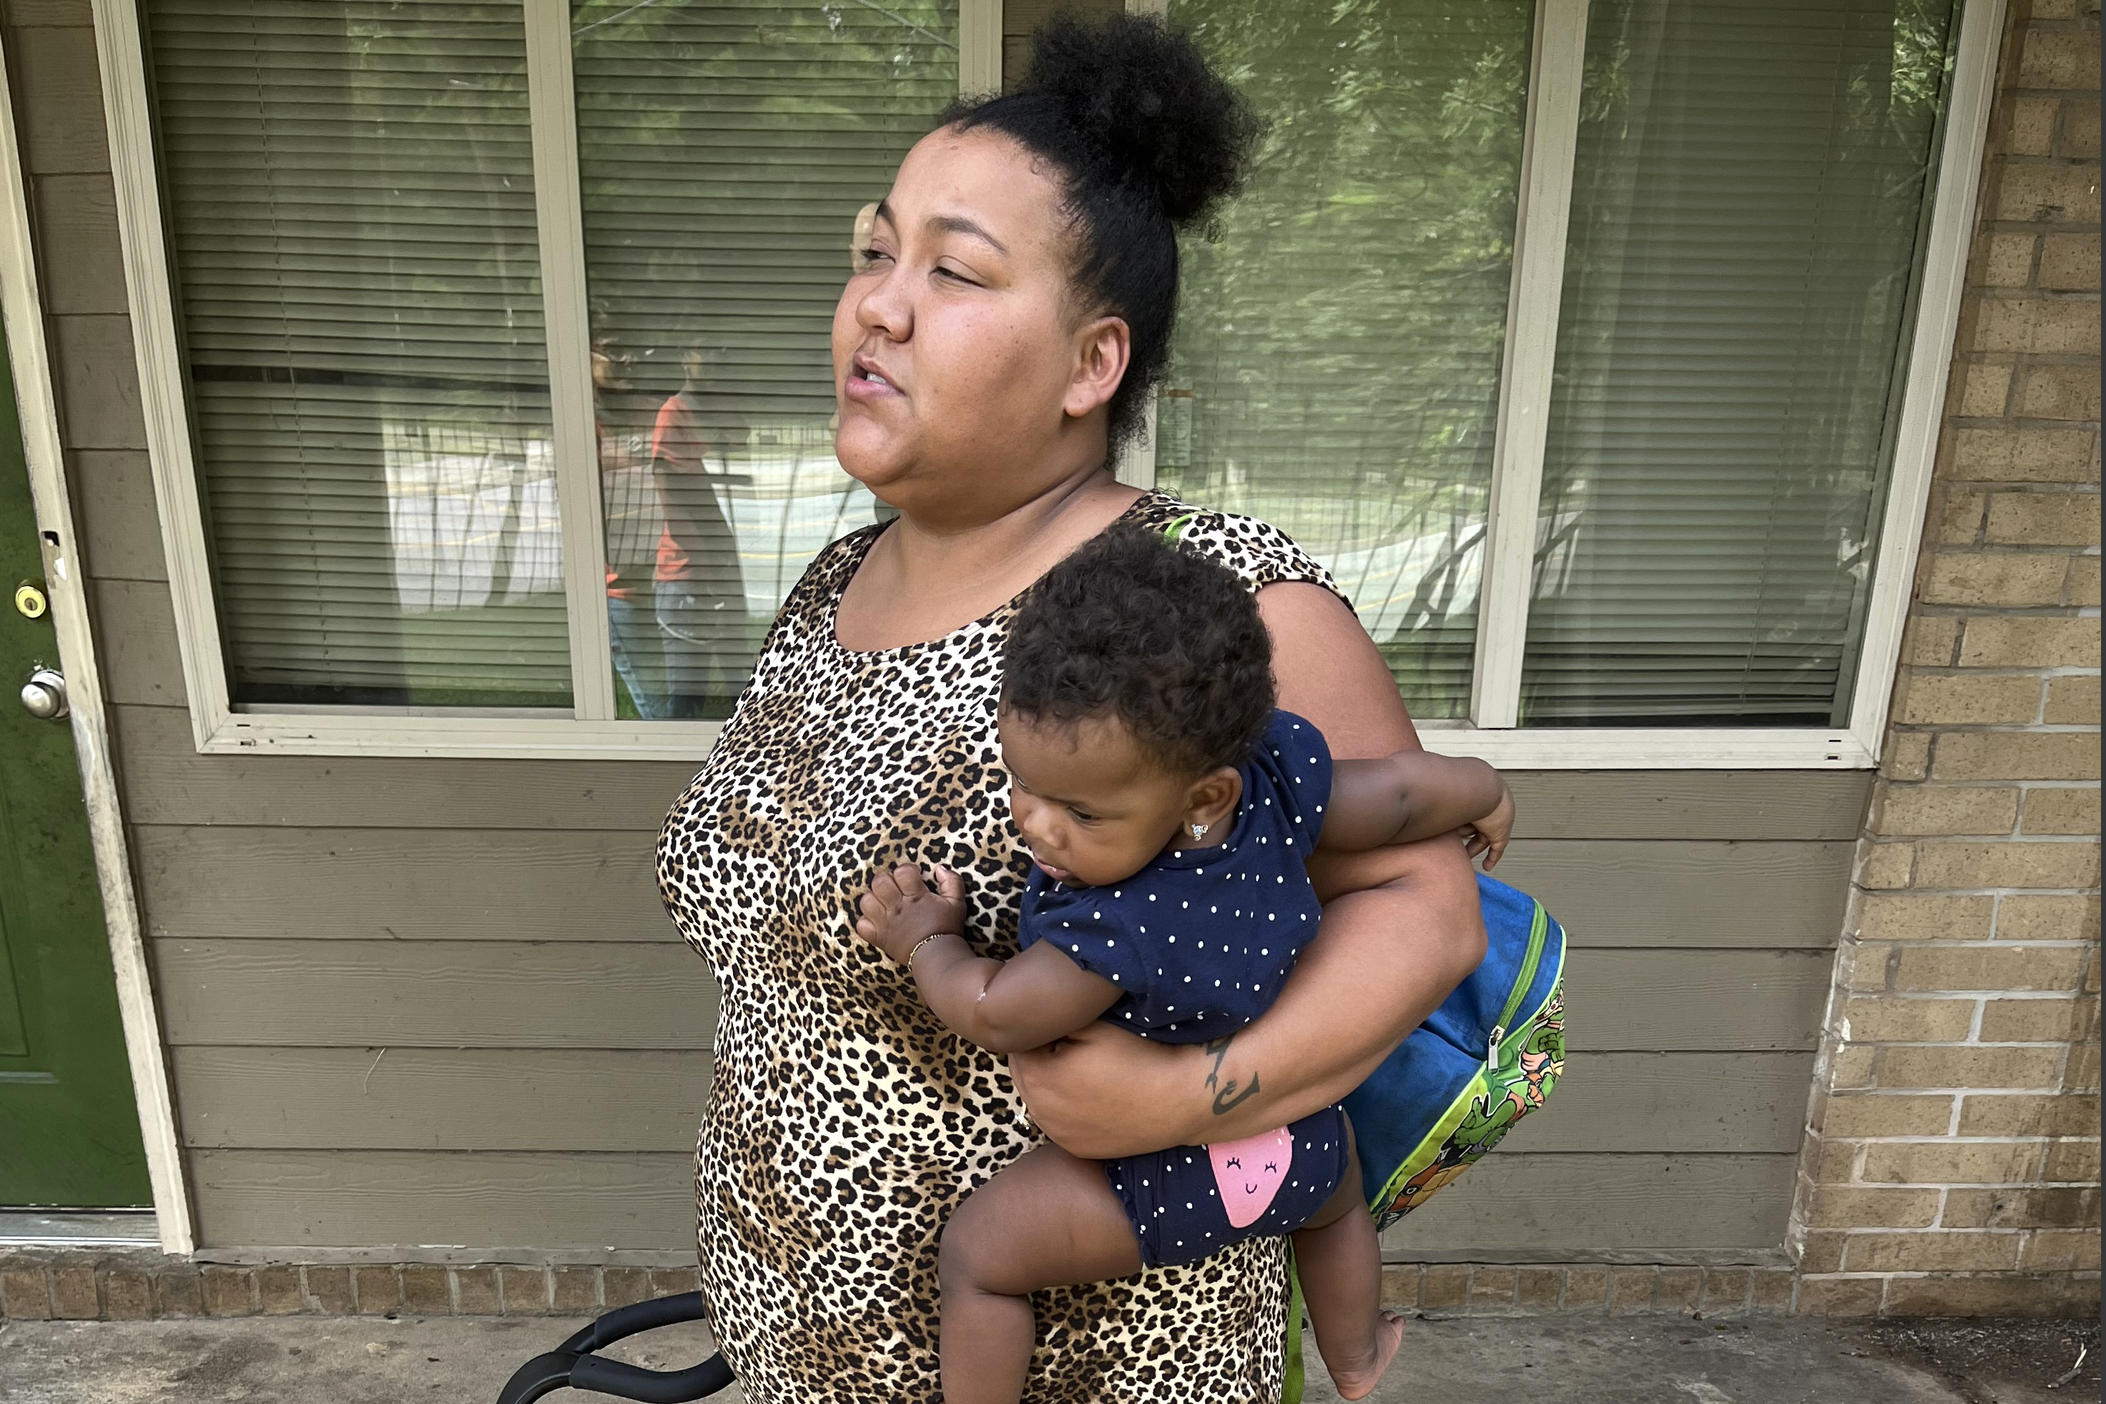 Louana Joseph and her daughter, Marlie, outside their former apartment complex in southwestern Atlanta. Joseph moved out of the unit because she suspects the gray and brown splotches that were spreading through the apartment were mold. After rents soared during the pandemic, some families were forced to live in substandard housing, which increased their risk for health problems such a s asthma and lead poisoning.